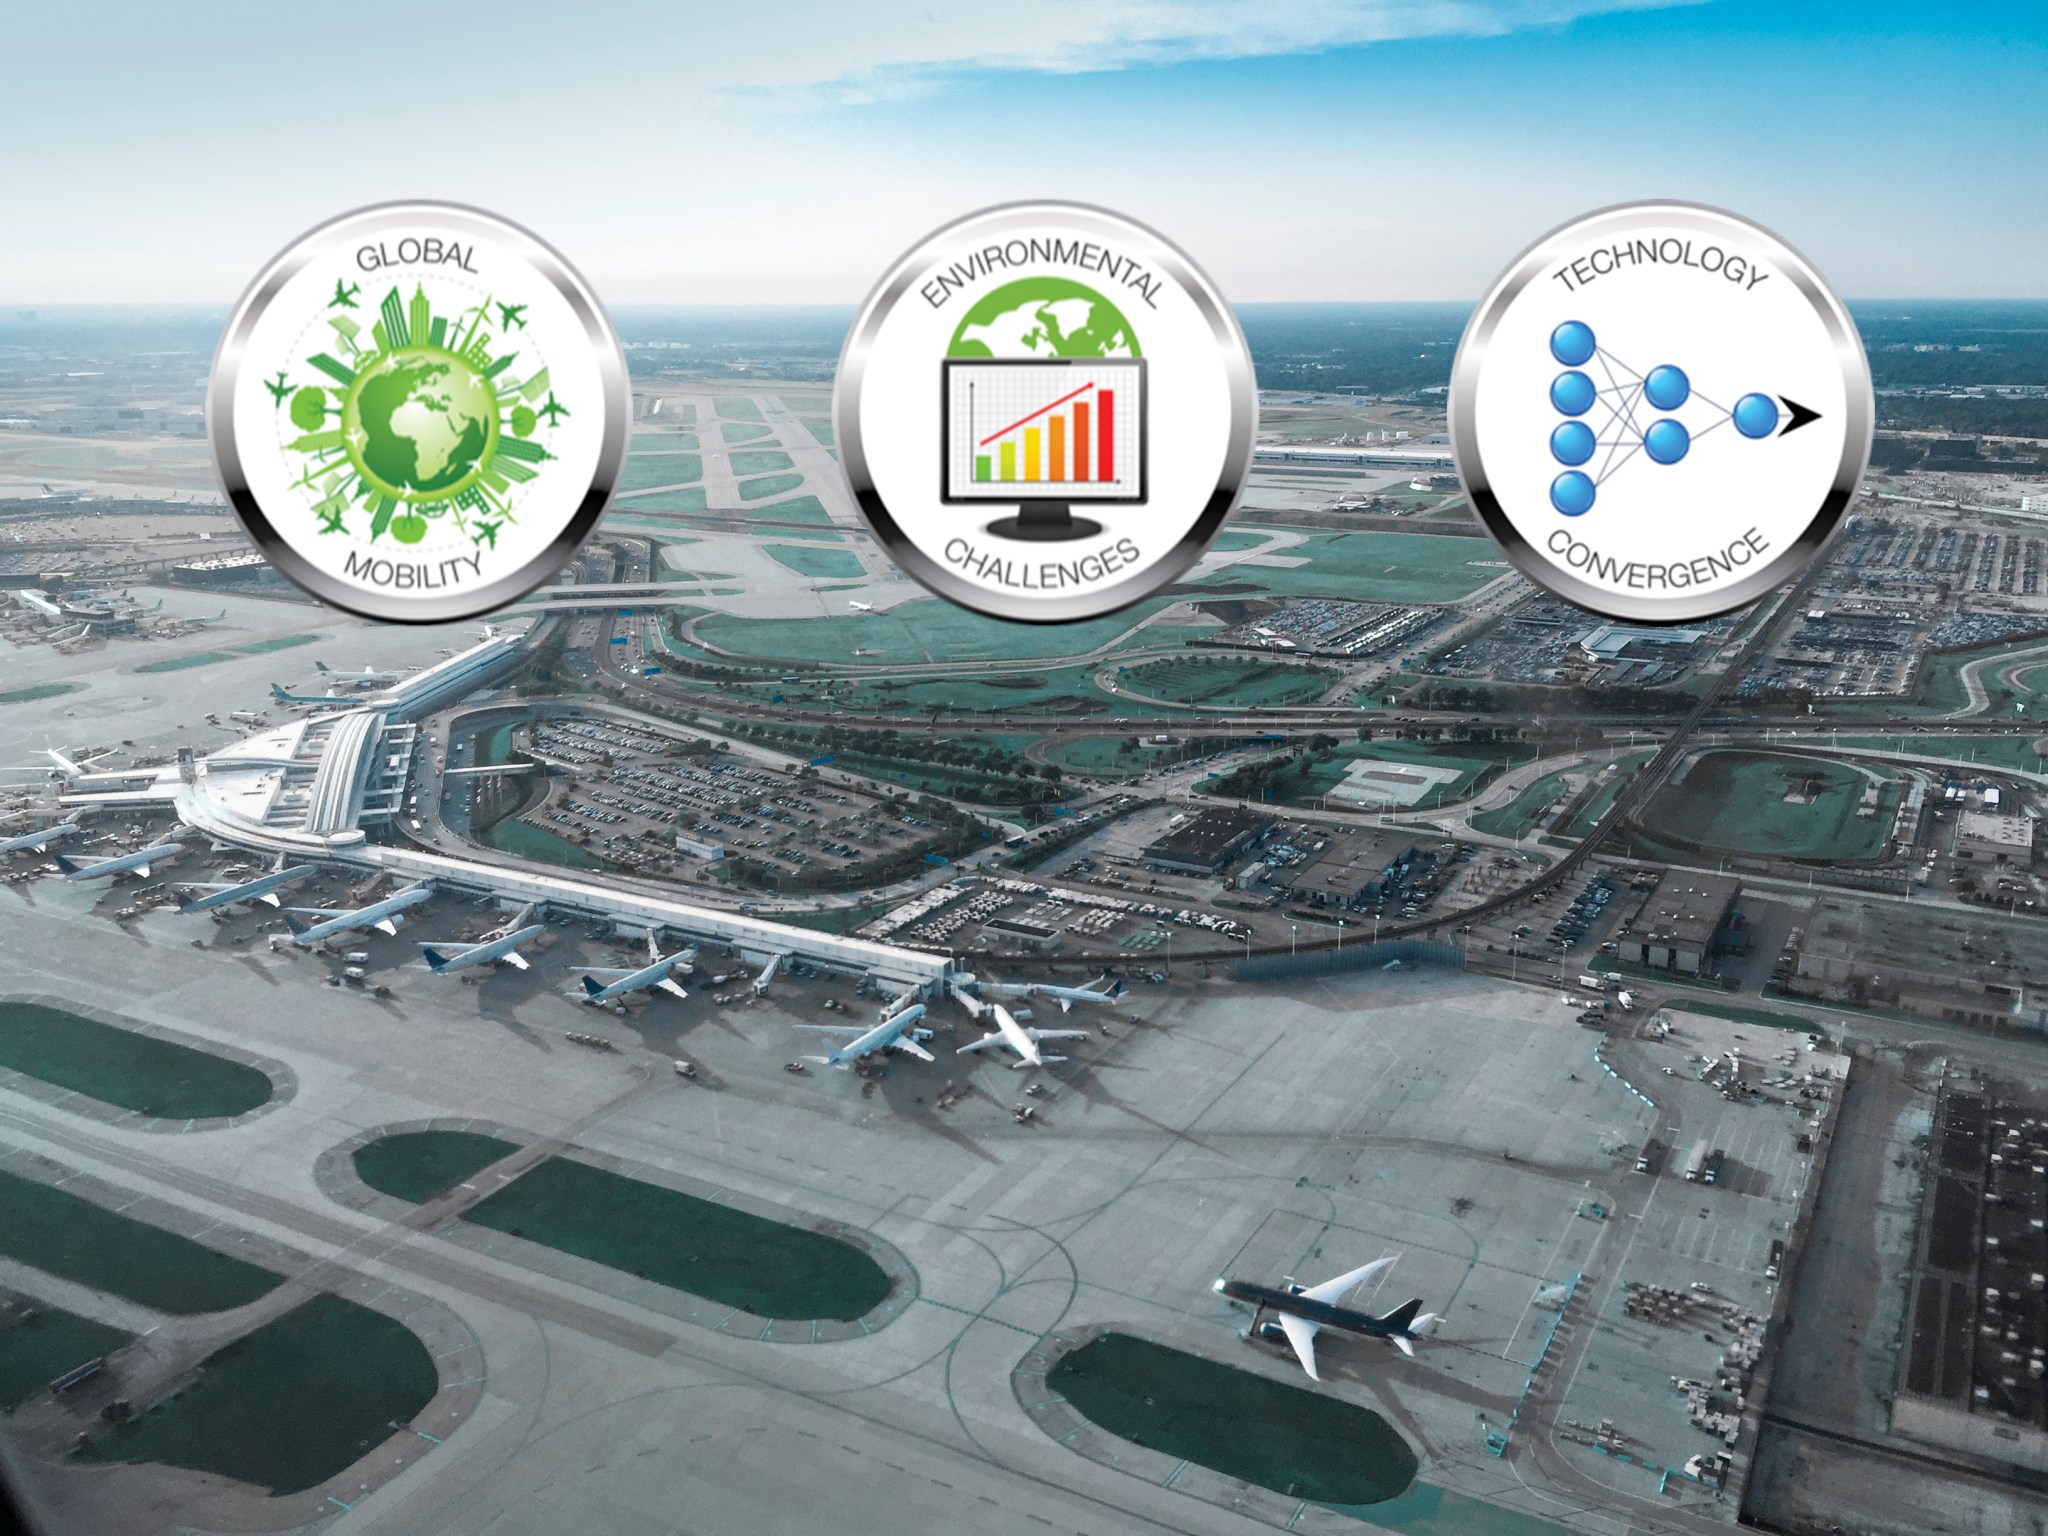 Image of an aerial view of an airport. On top of the image in the middle are three Mega Driver icons. On the left is Global Mobility, the middle is Environmental Challenges and on the right is Technology Convergence.